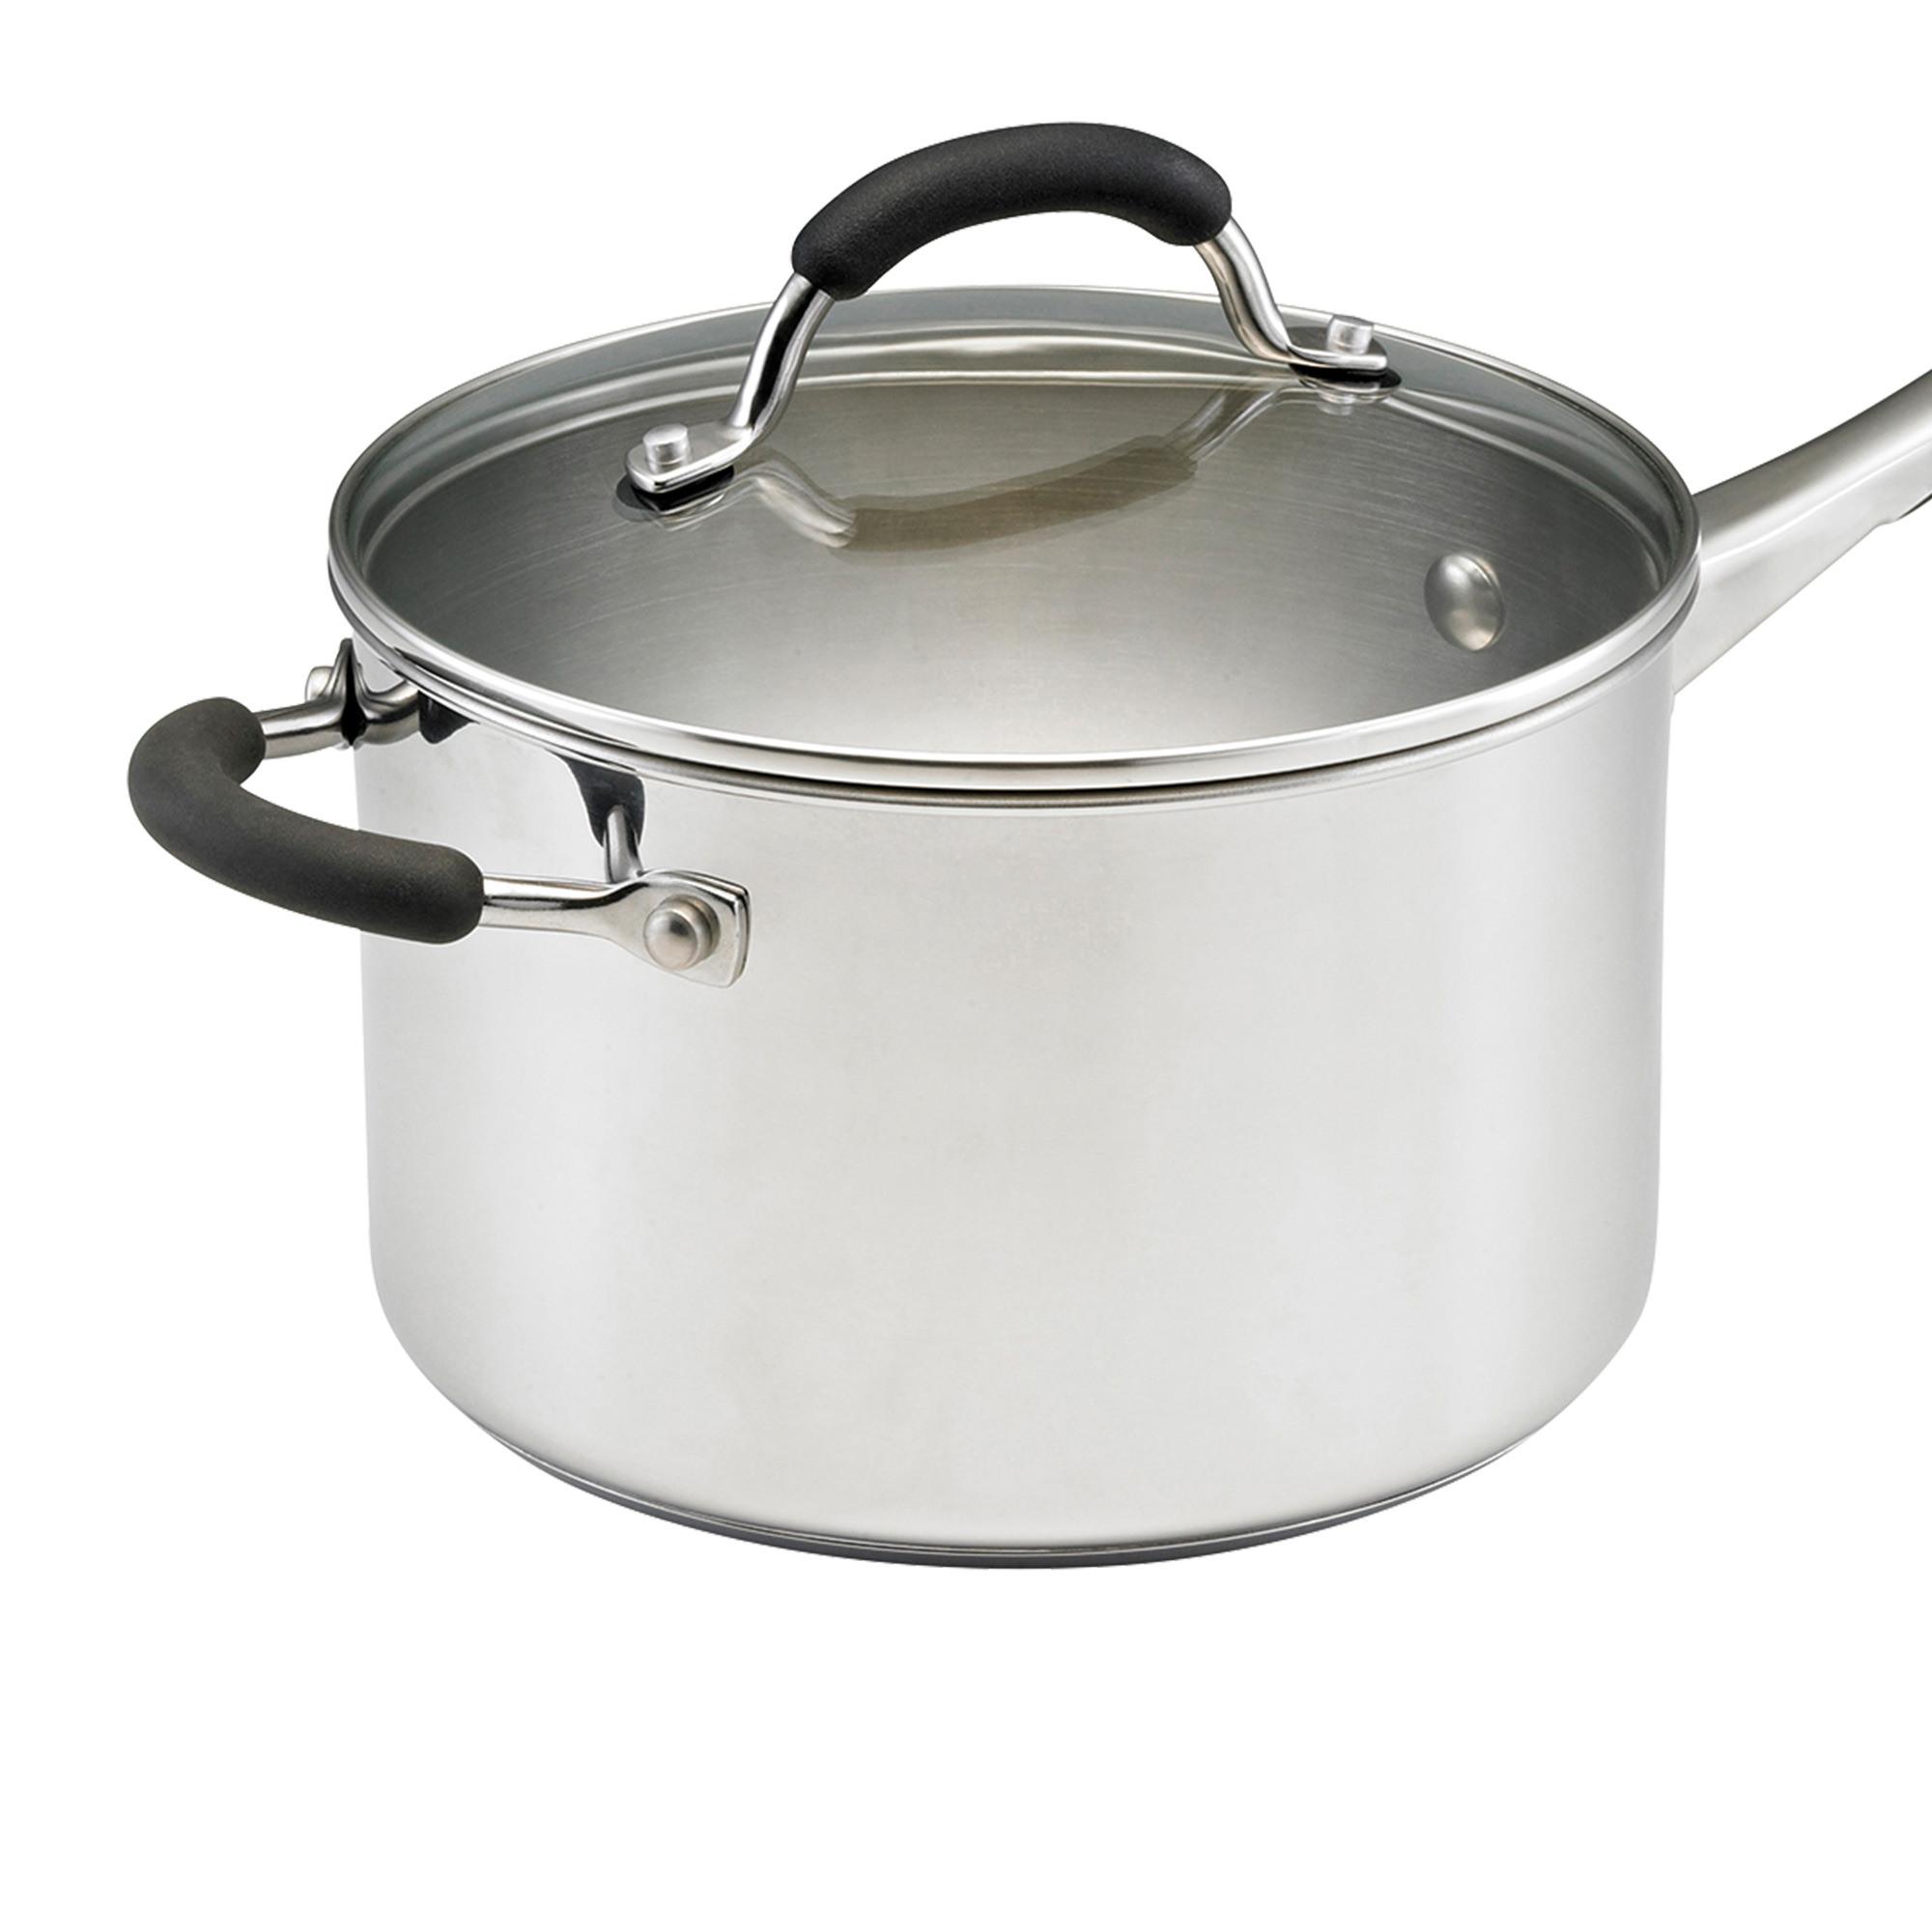 Raco Contemporary Stainless Steel Saucepan 20cm - 3.8L Image 4